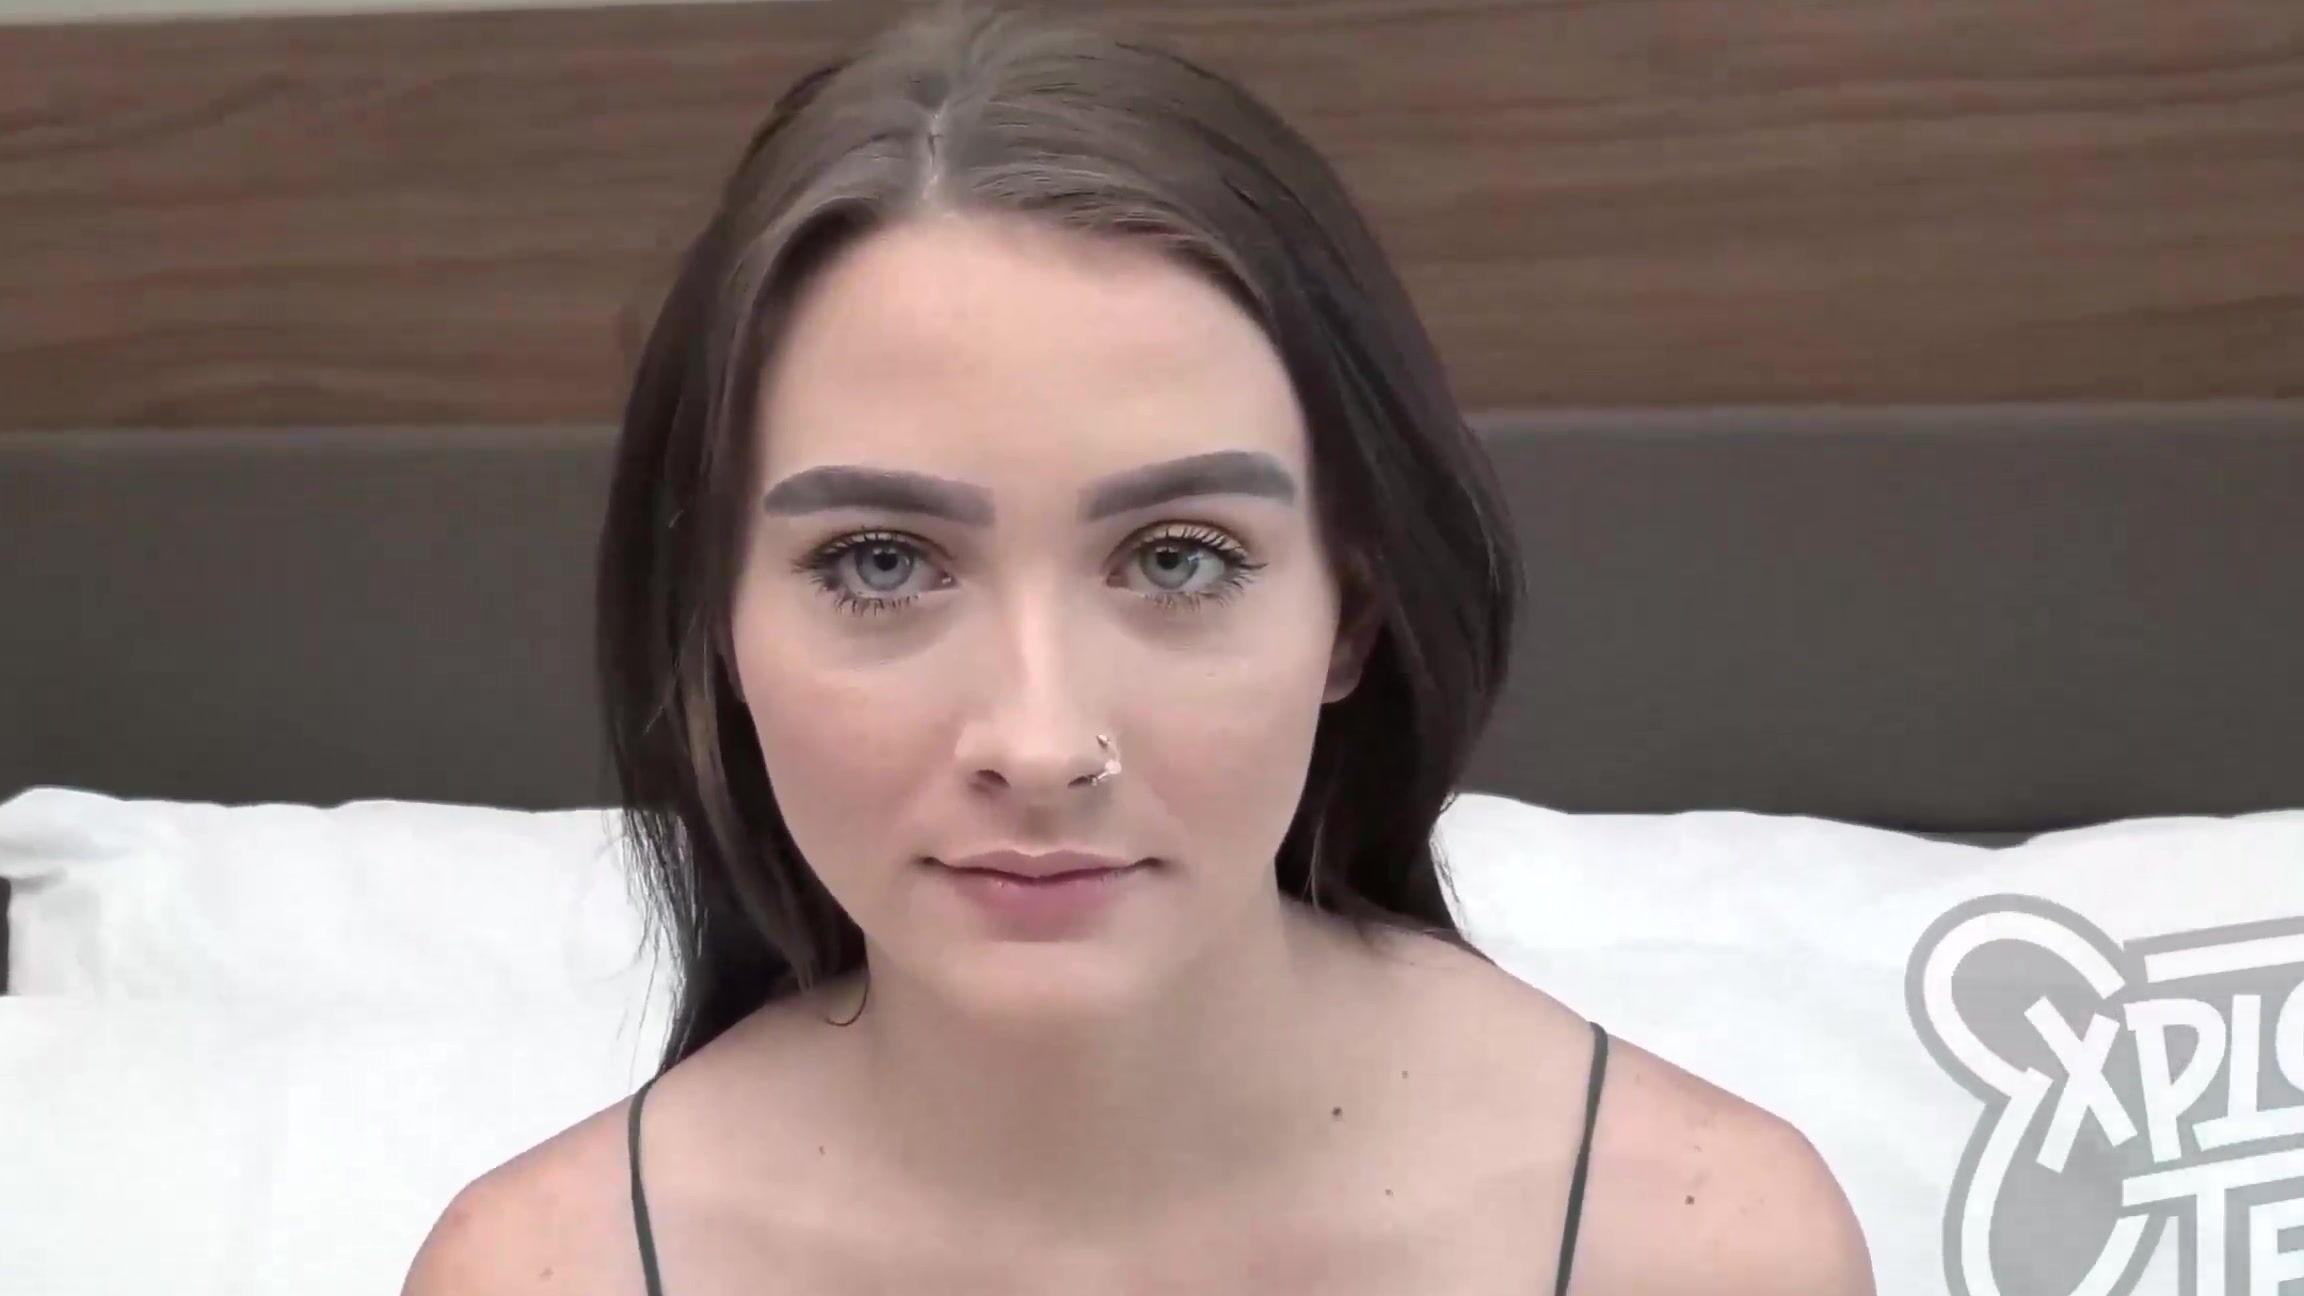 Crazy Hot 19 yr mature with green eyes makes her porn debut image